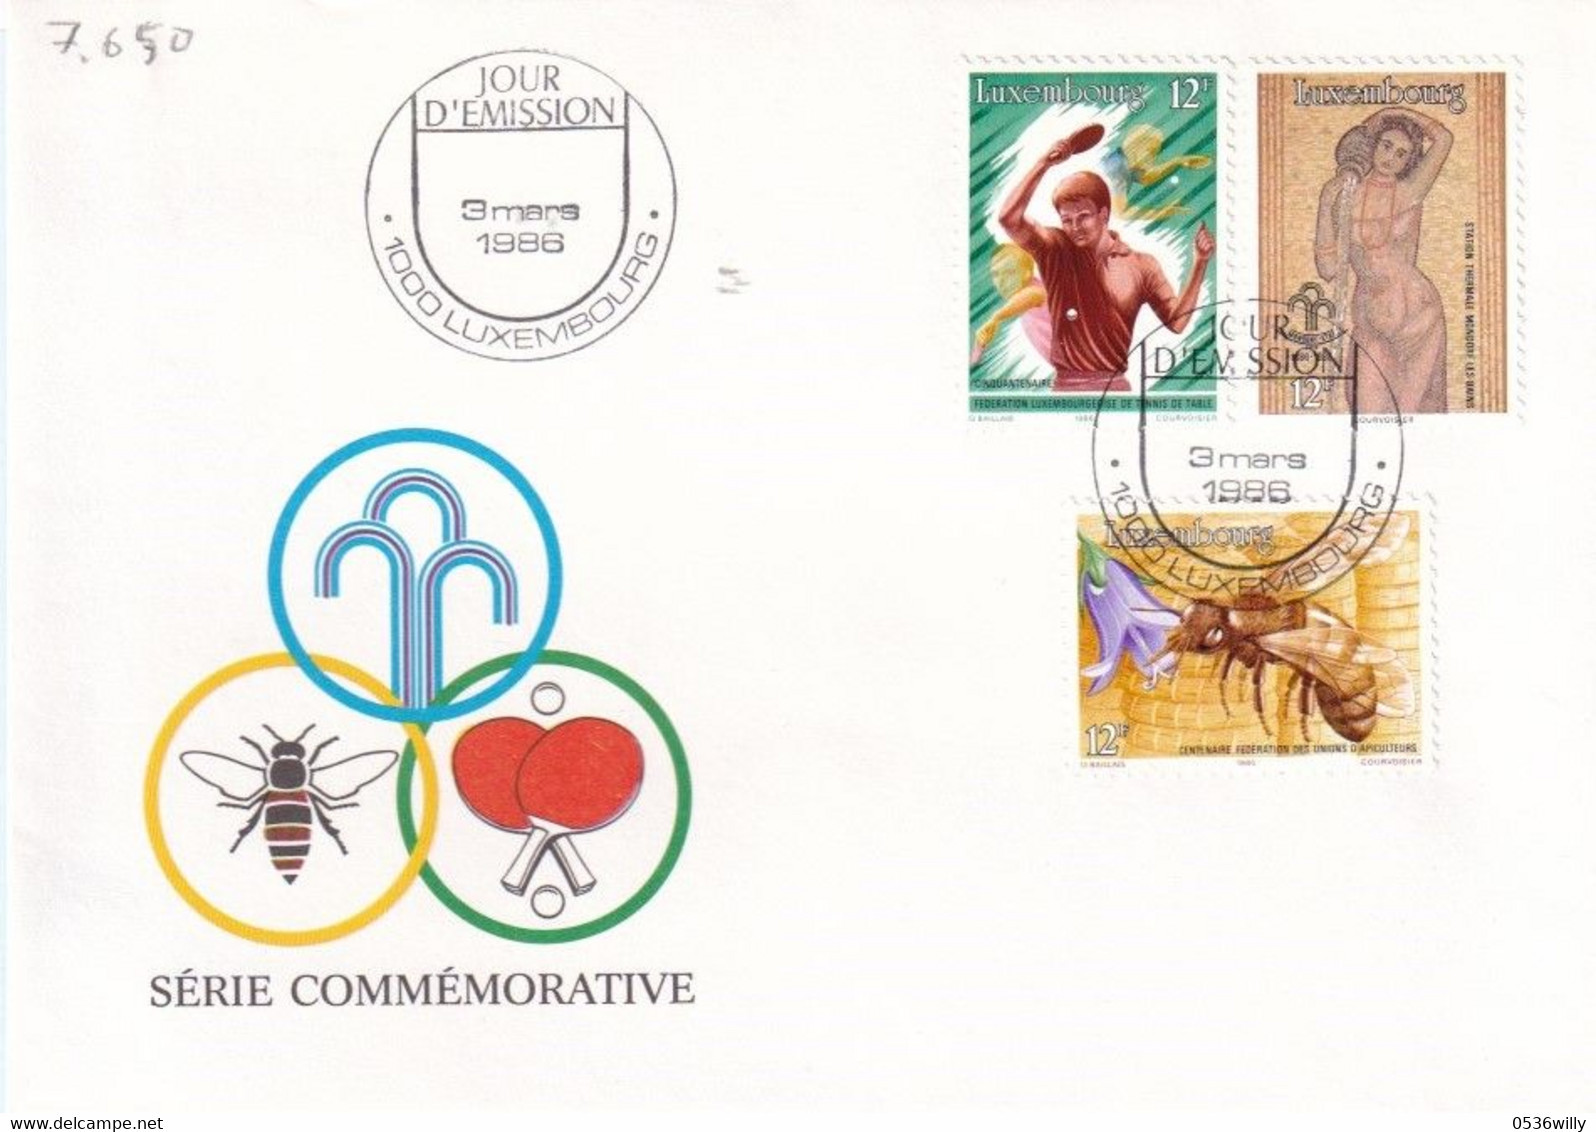 Luxembourg 1986 - FDC Jahresereignisse (7.650) - Lettres & Documents